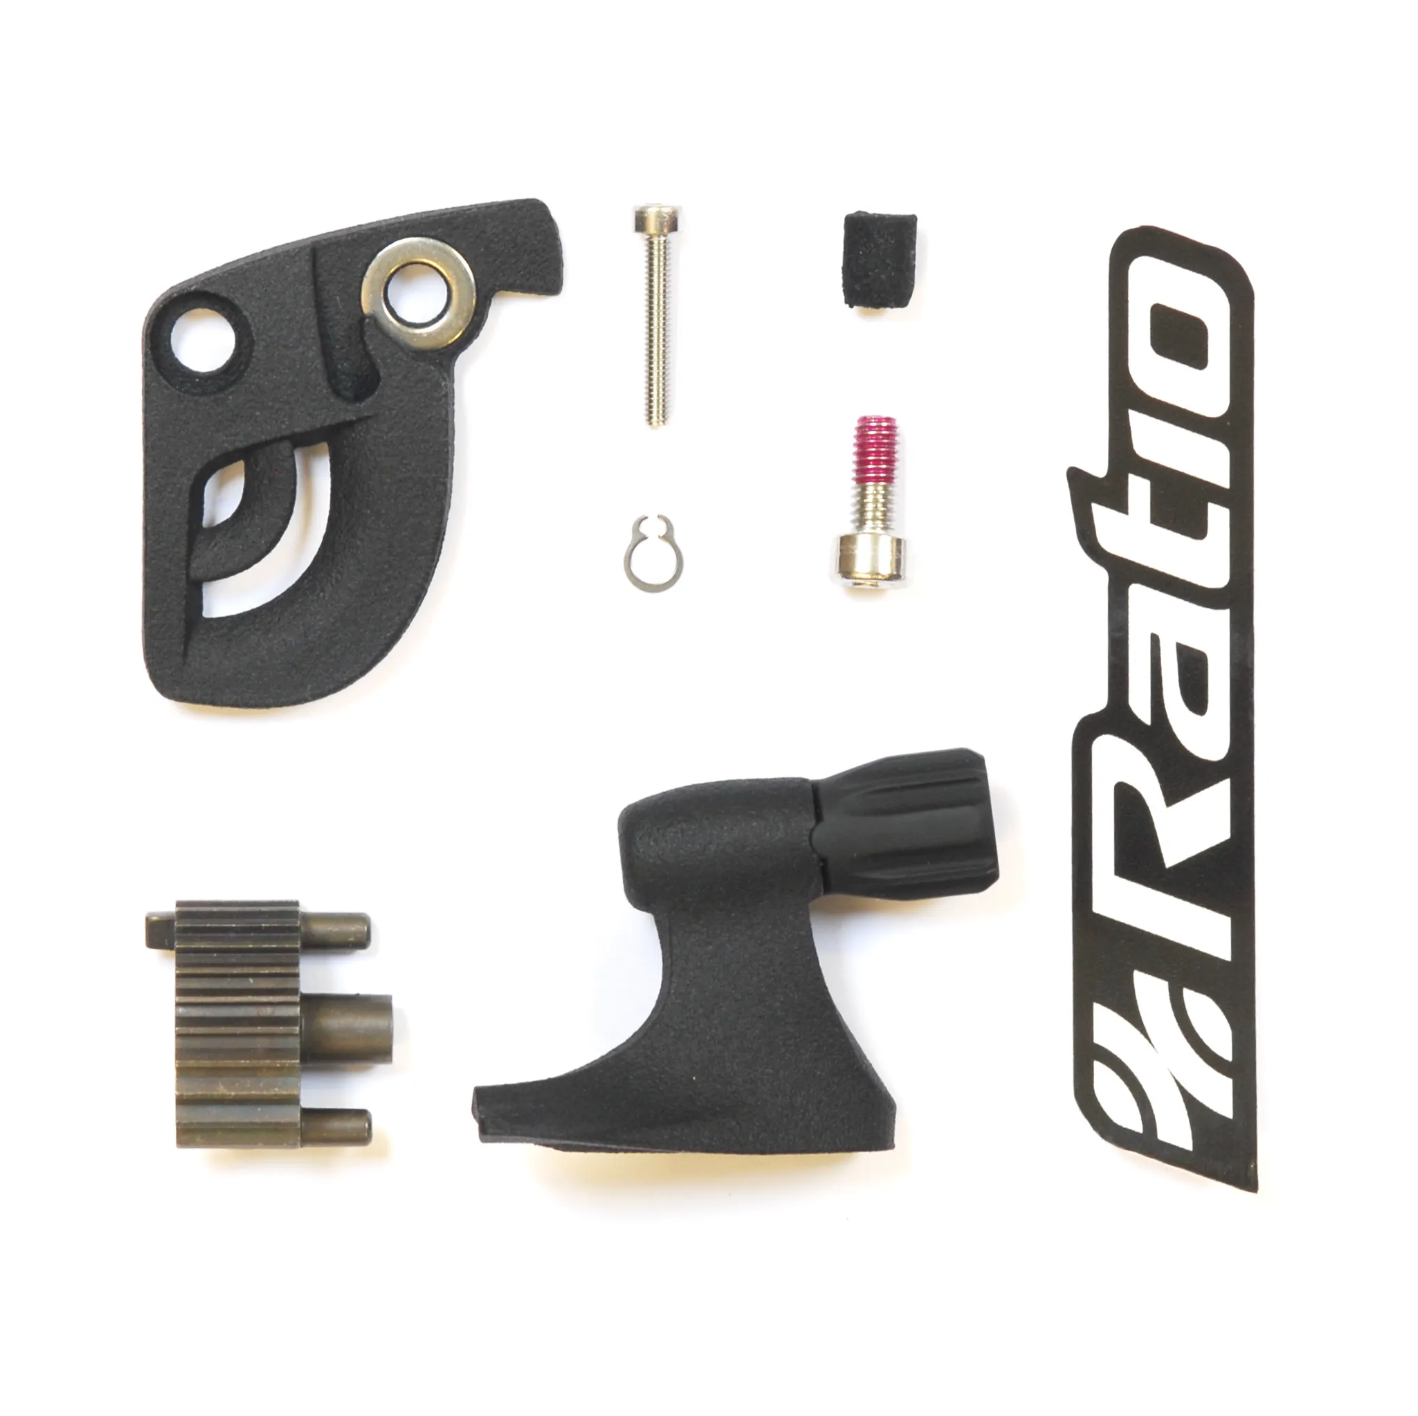 NEW Ratio 1x12 Wide Upgrade Kit - Rear Cable Exit